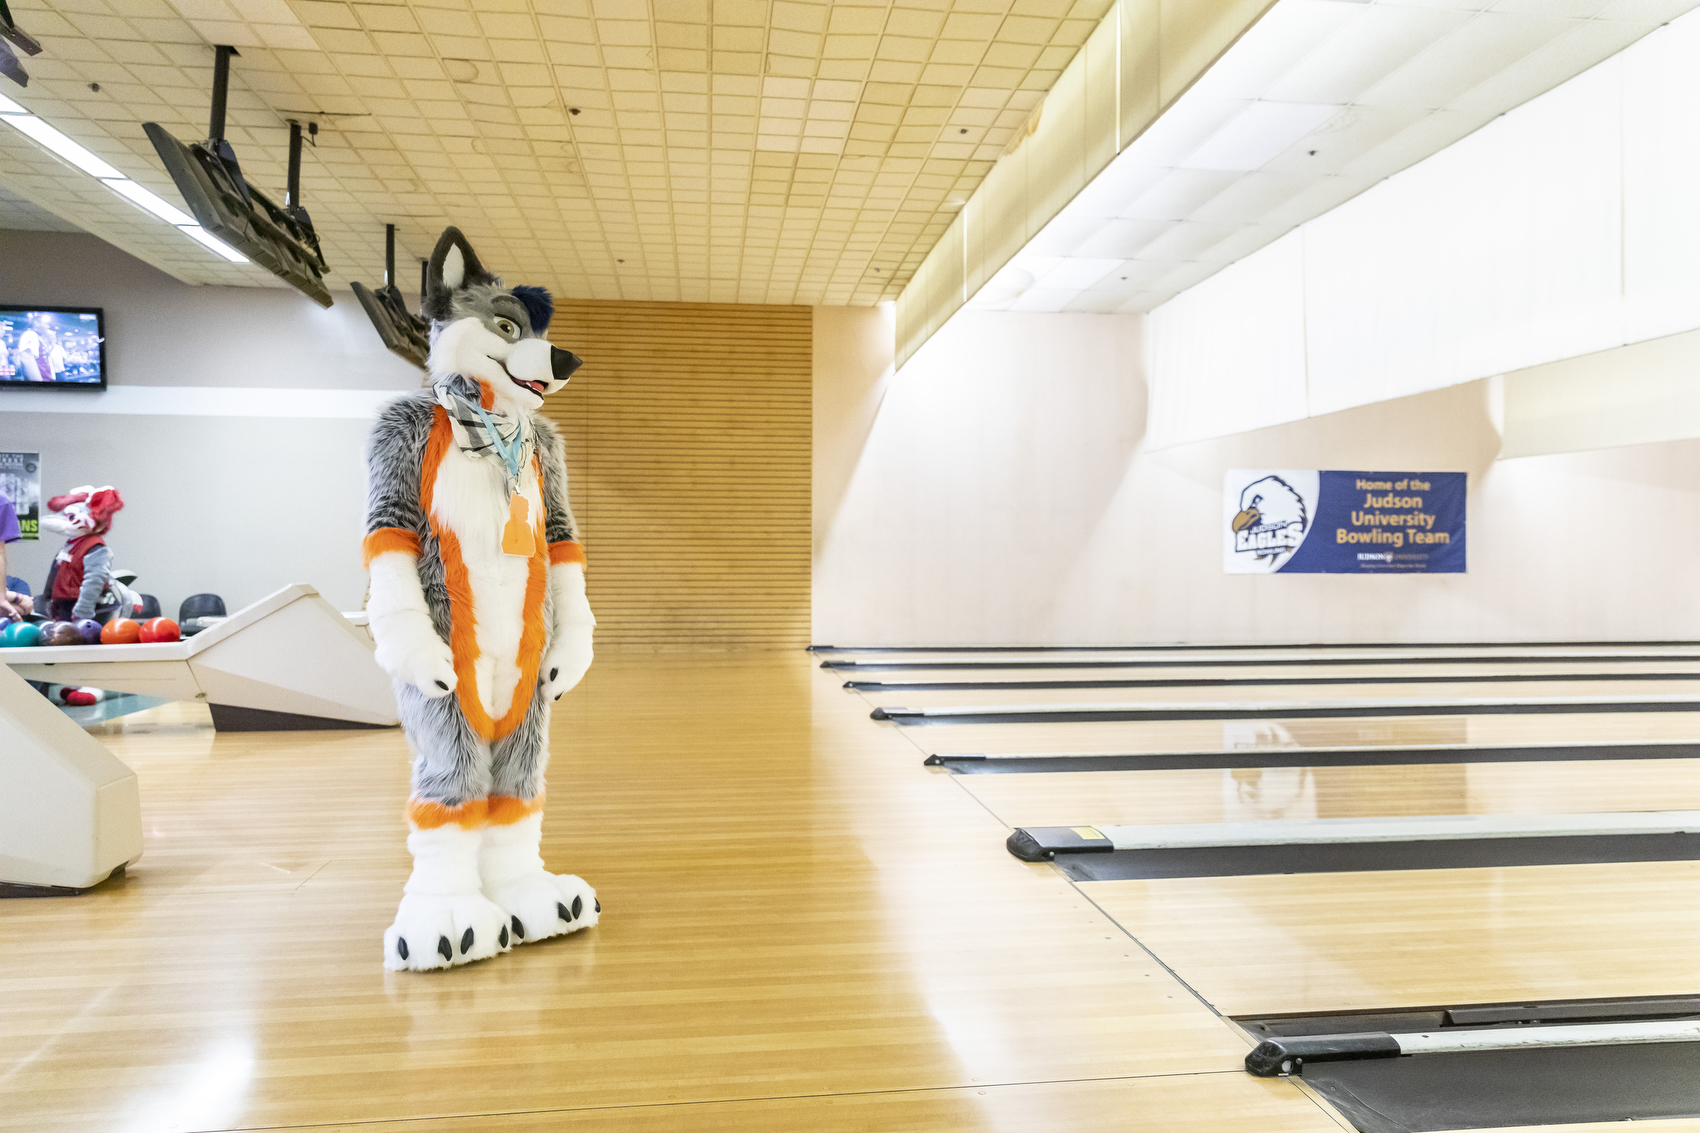 Every few weeks a group of Chicago-area furries gather at a local bowling alley to socialize. The Midwest Furbowl brings in an average of 70 people, twice a month at Polar Creek Bowl Lanes.”Lemonbrat is a boutique manufacturer that makes fursuits – full-body, stylized animal attire worn by a group of people who call themselves “furries.” Lemonbrat’s suits retail for up to $5,000. The company’s team of 16 tailors, designers and molders churn out 20 to 30 suits a month – they say they’re one of the largest fursuit makers in the country. March 23, 2019. Manuel Martinez/WBEZ